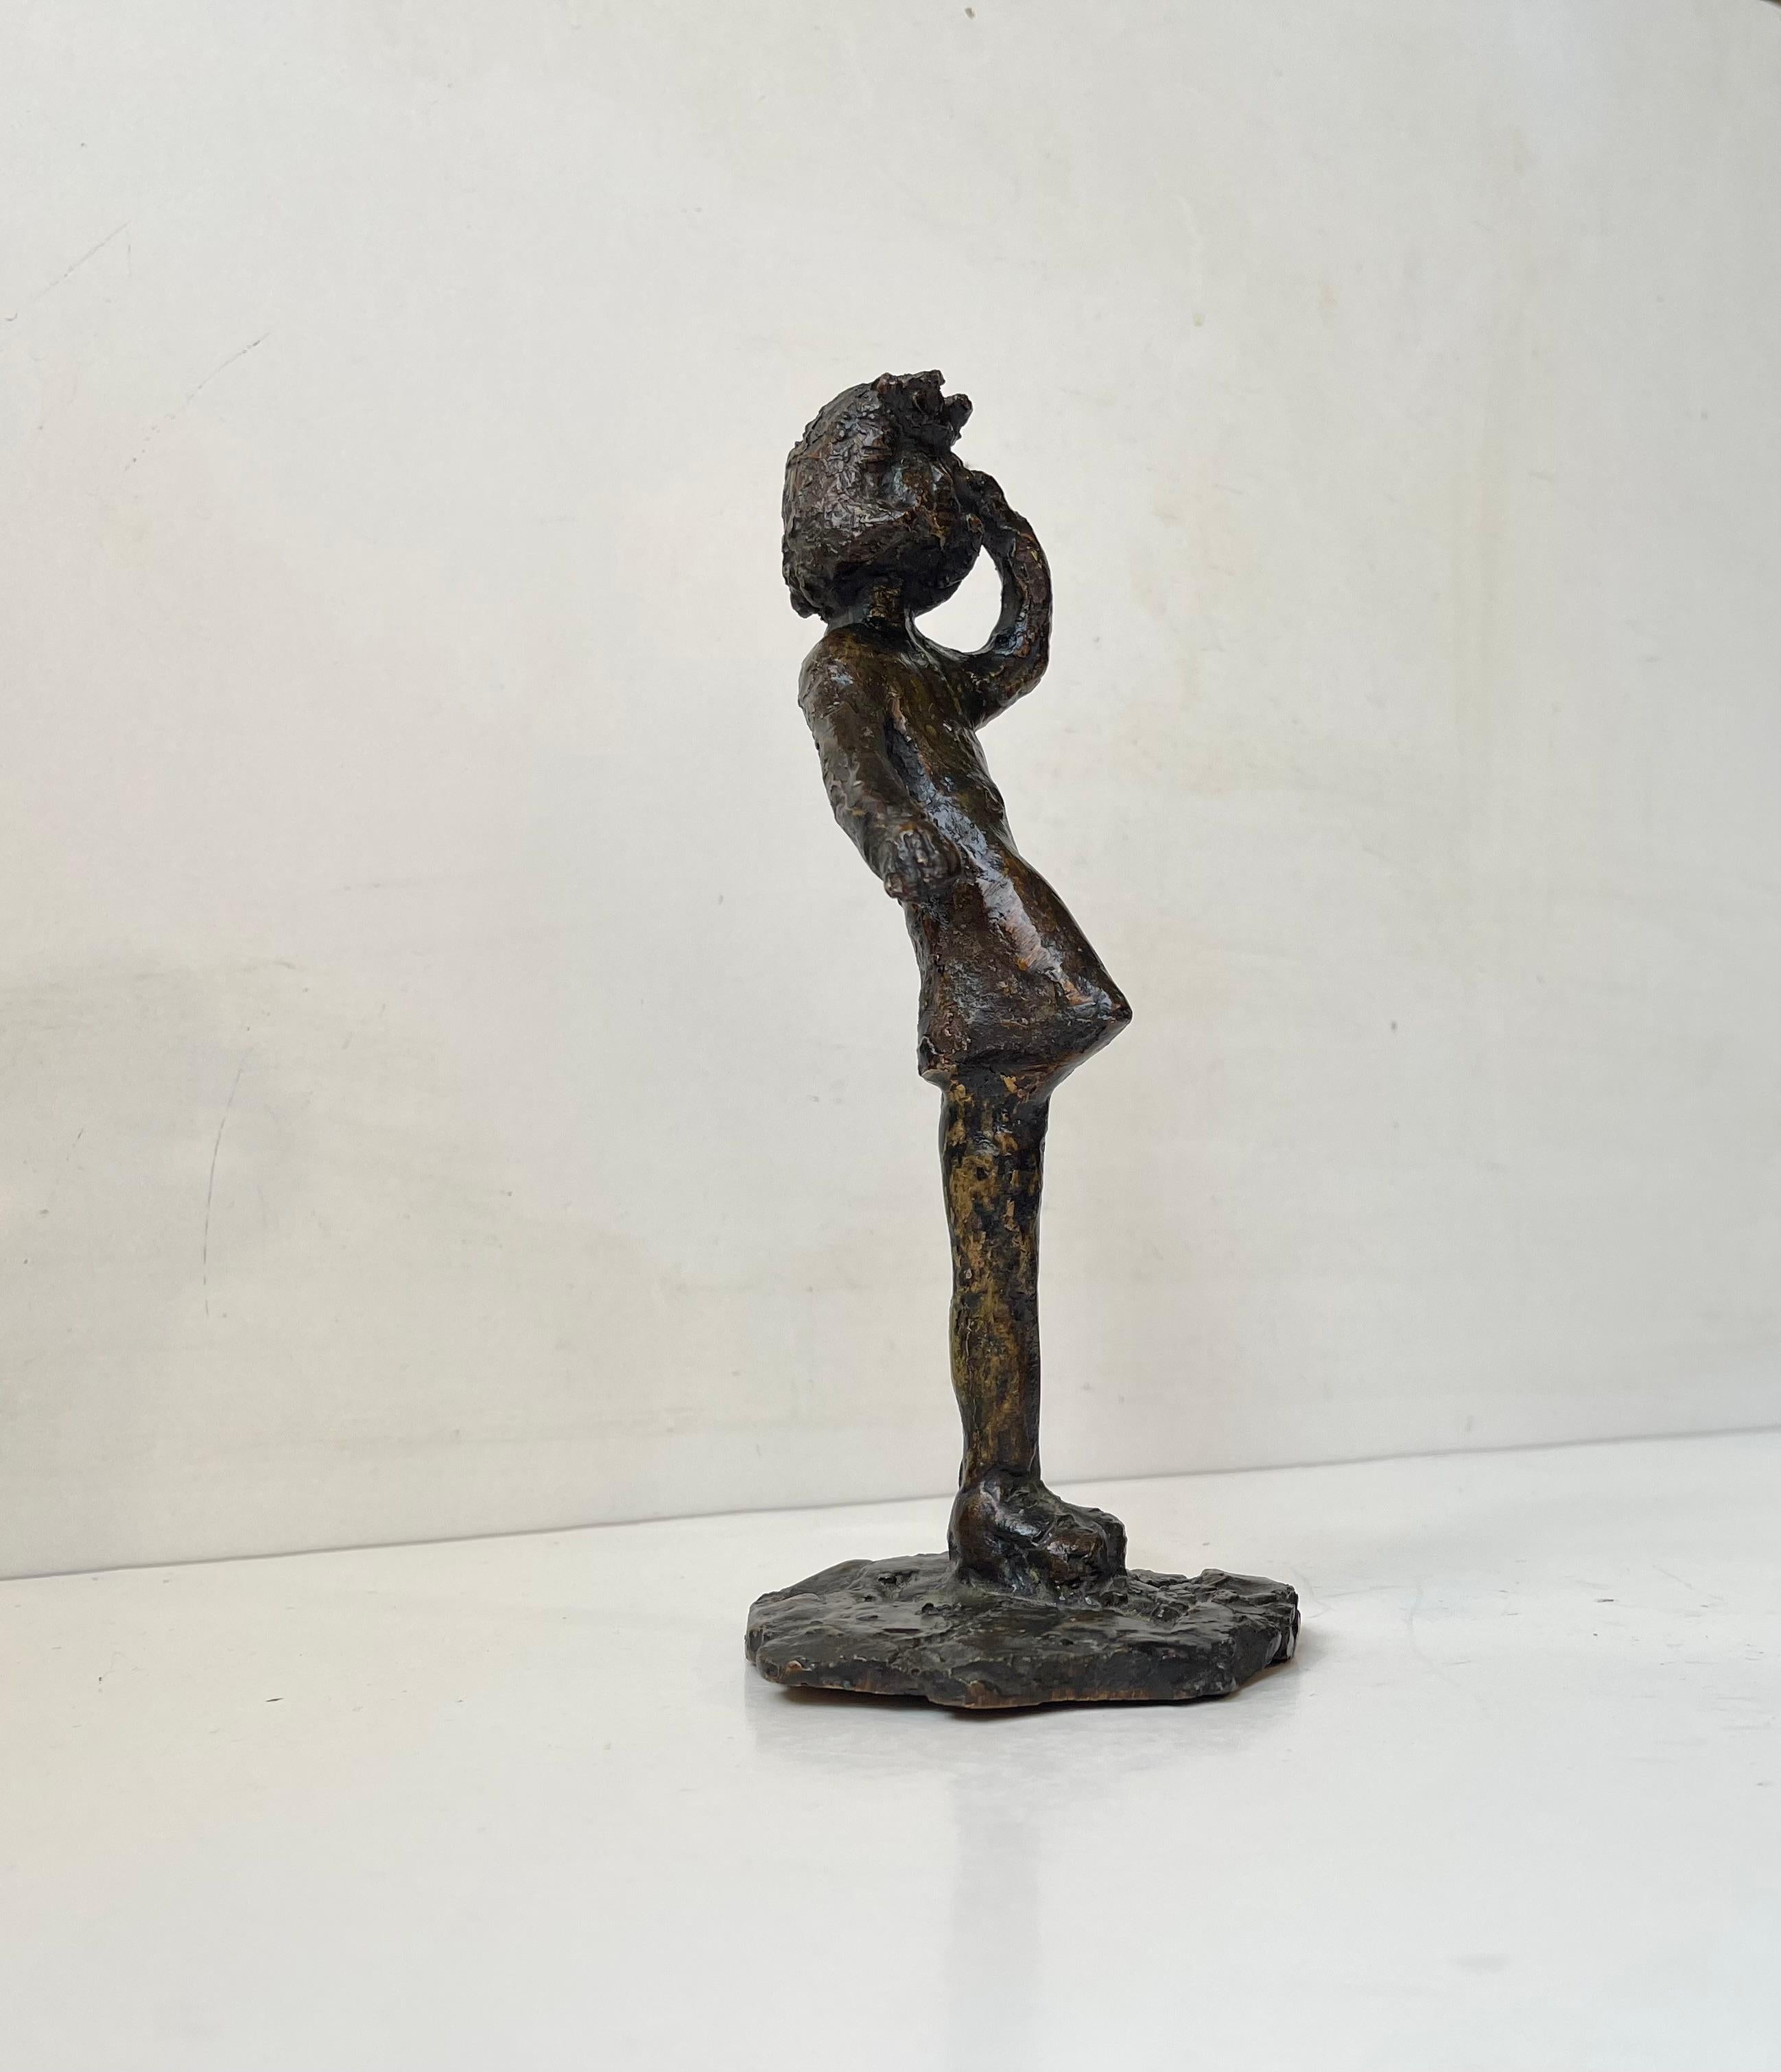 A remarkable bronze cast from a free-hand plaster/ceramic mold. A technique inspired from Swiss icon Alberto Giacometti. It signed by an unidentified Danish/Scandinavian artist/sculptor. Measurements: H: 21 cm, Diameter: 9.5 cm (base).

Free World